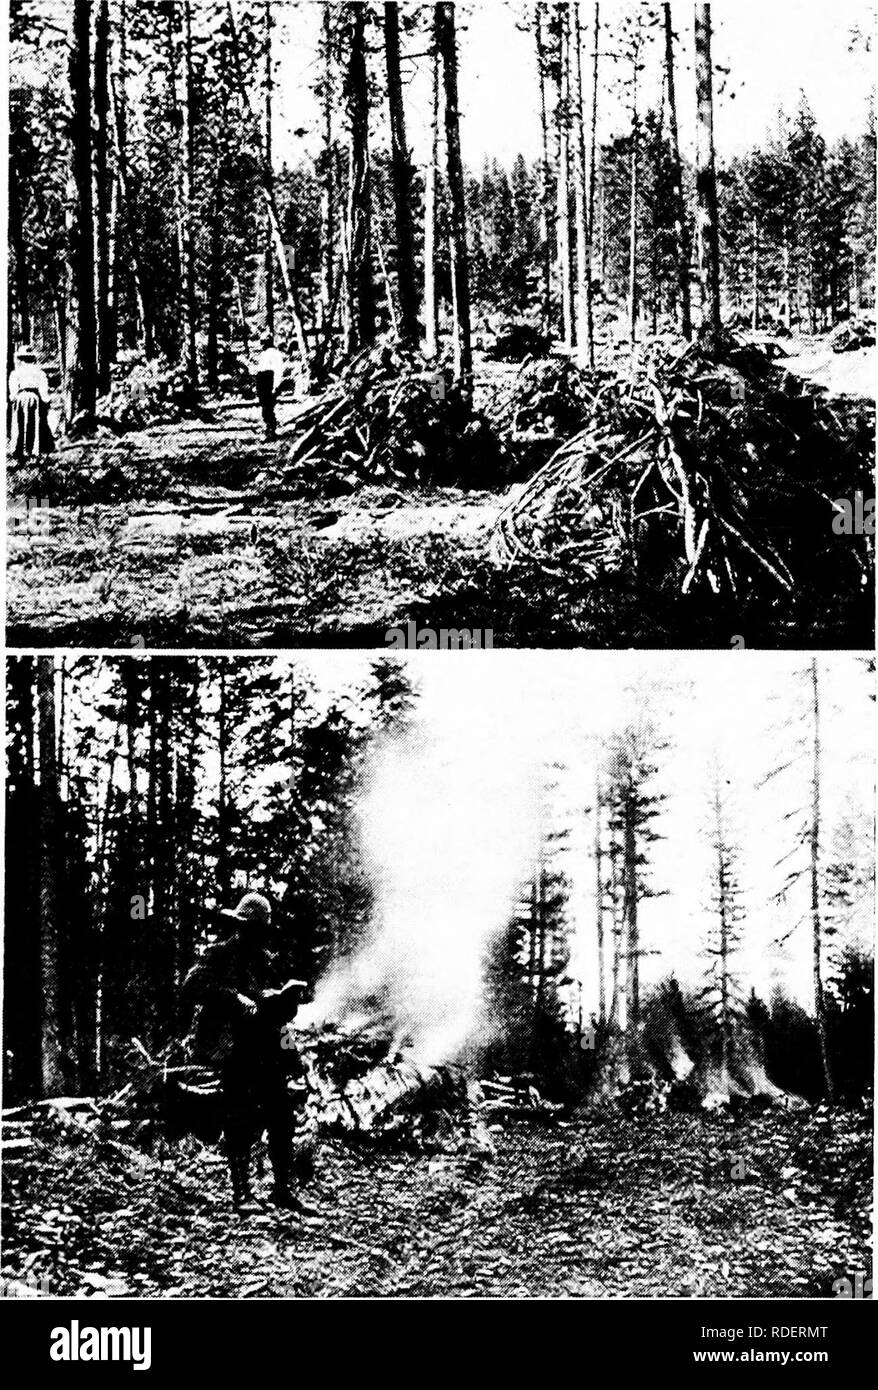 . Our national forests : a short popular account of the work of the United States Forest service on the national forests . United States. Forest Service; Forests and forestry. Figure 71. Brush piles nn a cut-over area before burning. Forest Service metliods iiini to clean uji the forest after logging so that forest fires have less inflammable material to feed on. Bitterroot National Forest. Montana. Figure T?. At a time of the year when there is least danger from fire the brush piles are burned. Missoula Xational Forest, Montana.. Please note that these images are extracted from scanned page i Stock Photo